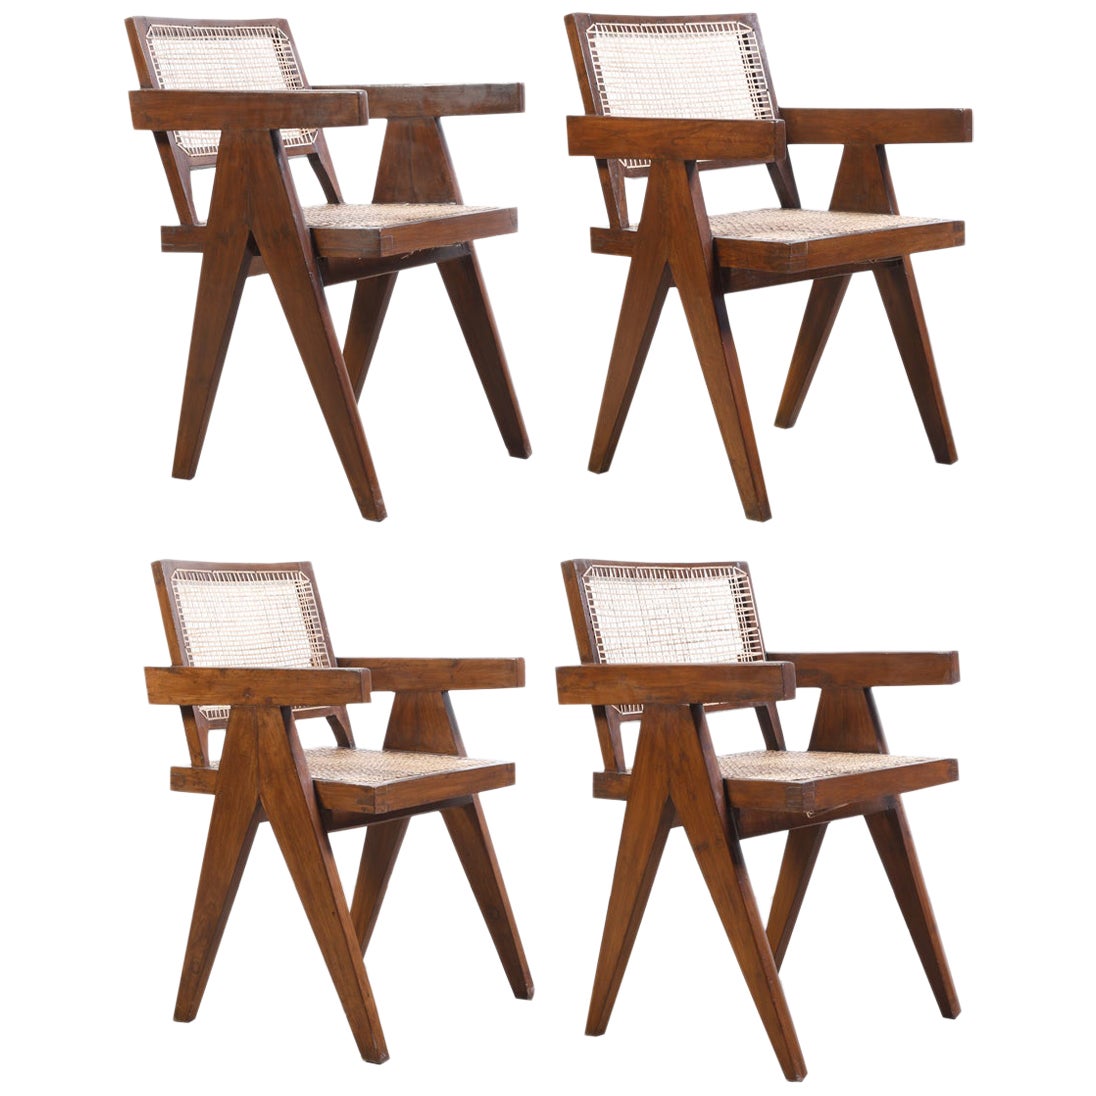 Pierre Jeanneret Set of 4 Chairs / Authentic Mid-Century Modern PJ-SI-28-B